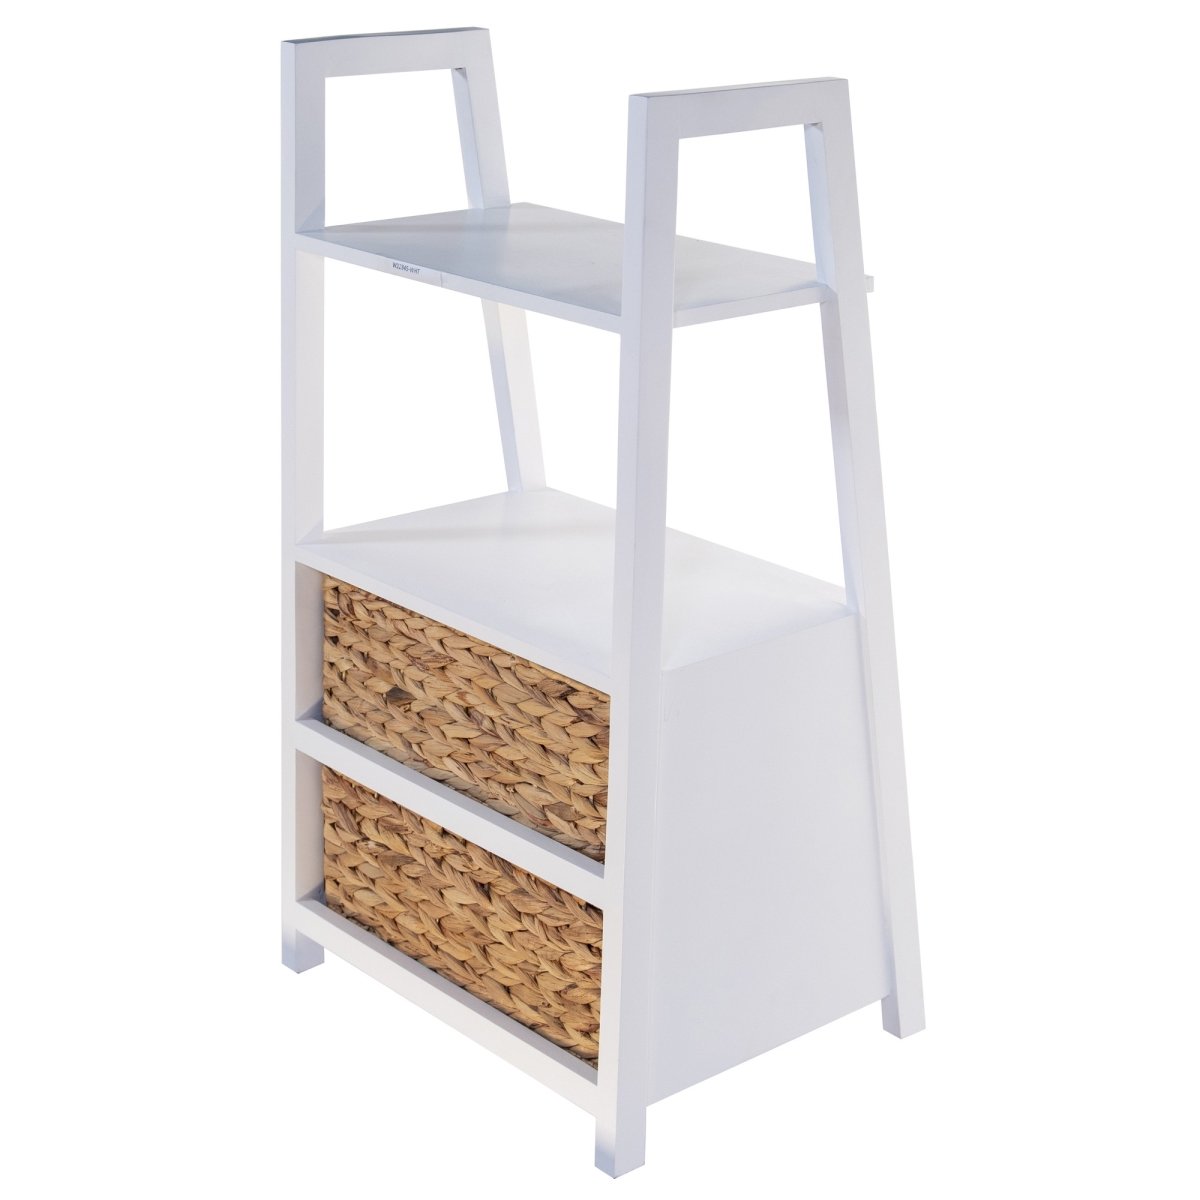 Home Roots 383043 White Wooden Shelving Unit 2 Shelves With 2 Basket Weave Drawers